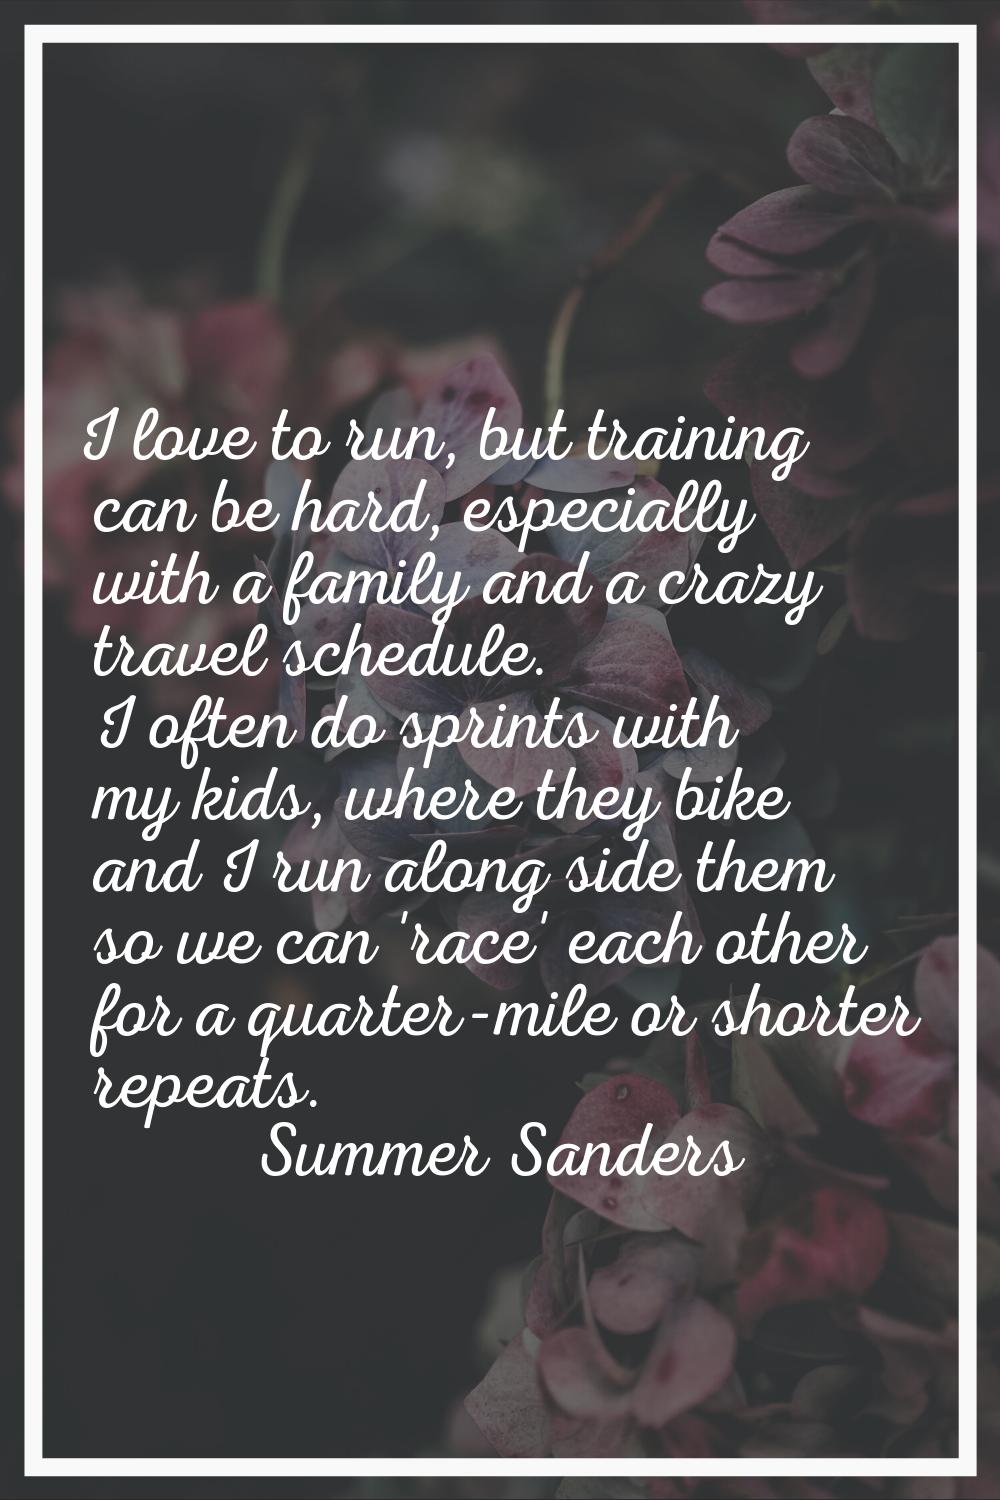 I love to run, but training can be hard, especially with a family and a crazy travel schedule. I of